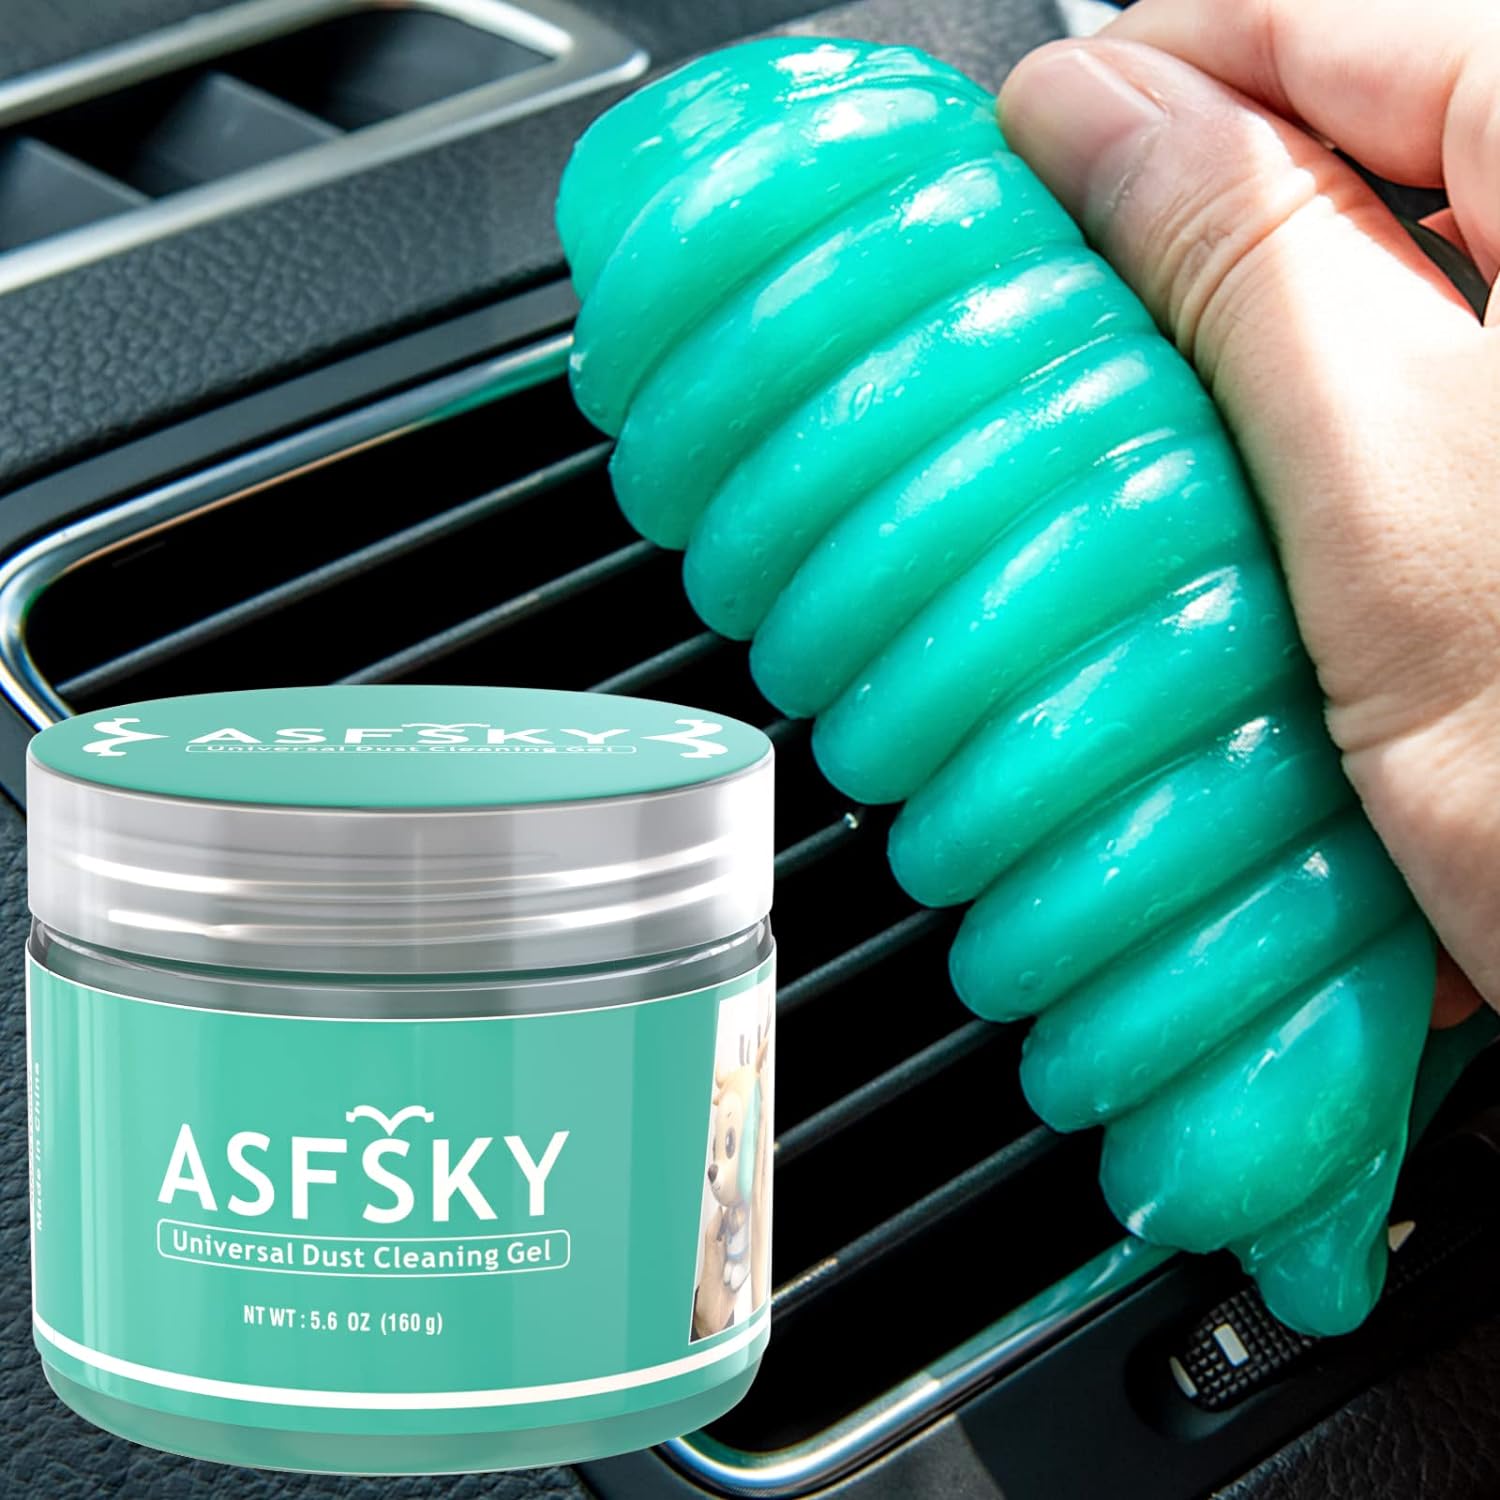 ASFSKY Cleaning Gel for Car Dust Cleaner Car Interior Slime for Detailing Putty for Dust Dirt Crumbs in Corners Inside The Car Clean T